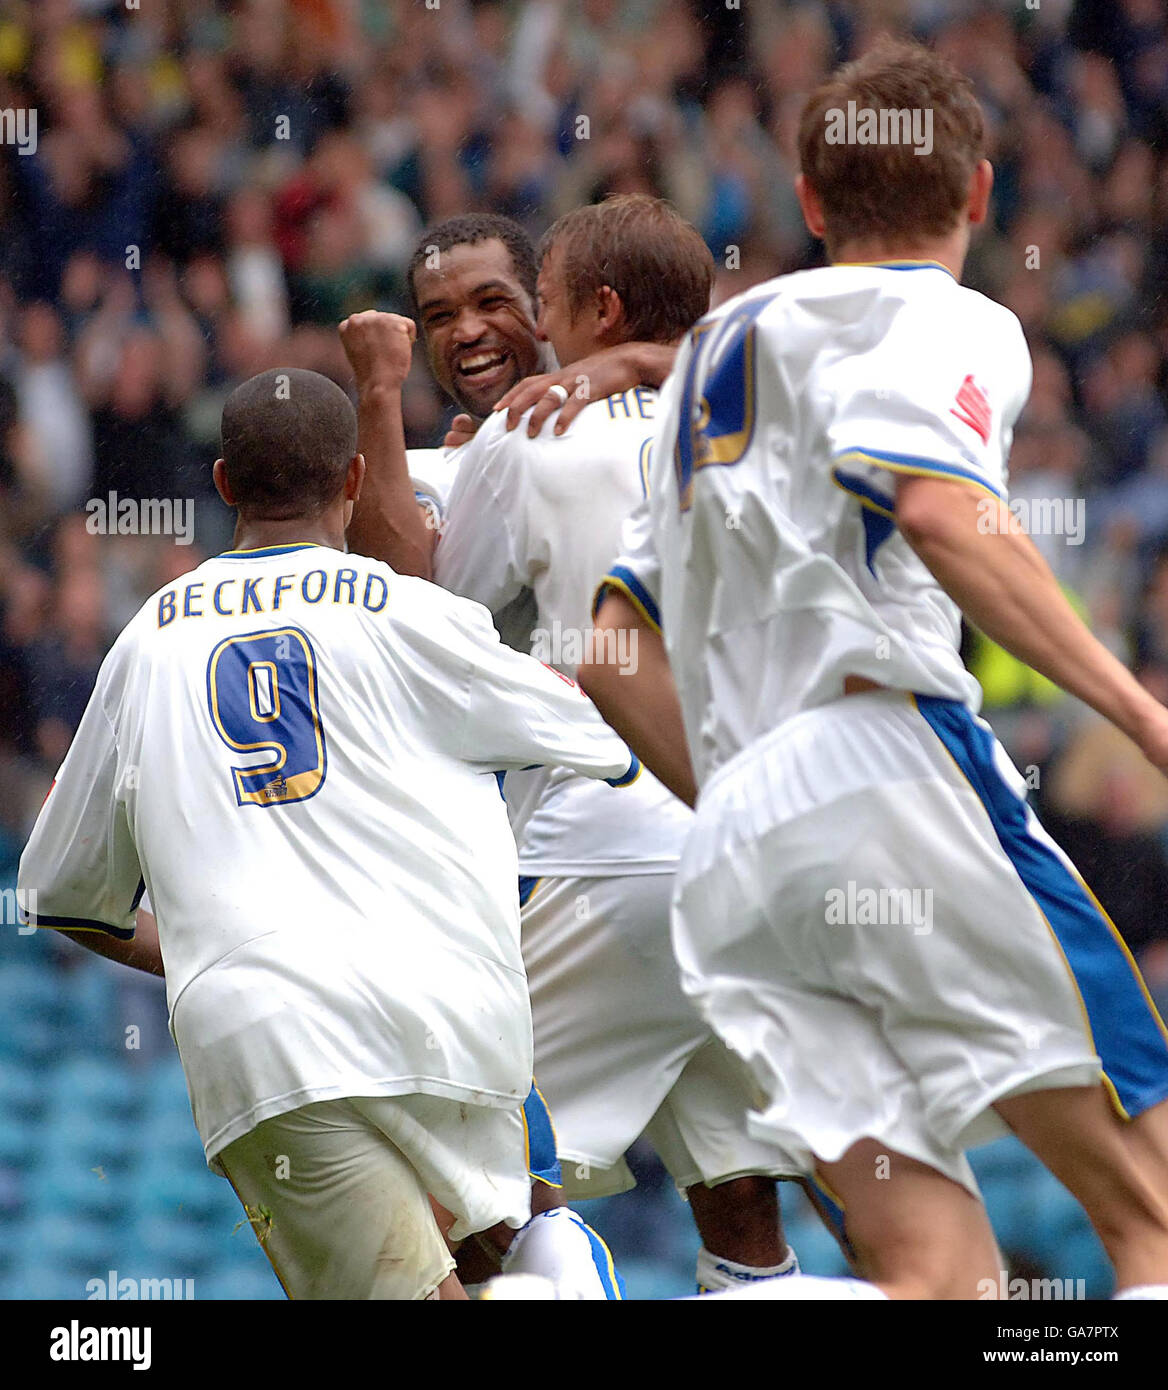 Leeds United's Rui Marques (centre) celebrates with team mates after scoring during the Coca-Cola Football League One match at Elland Road, Leeds. Stock Photo